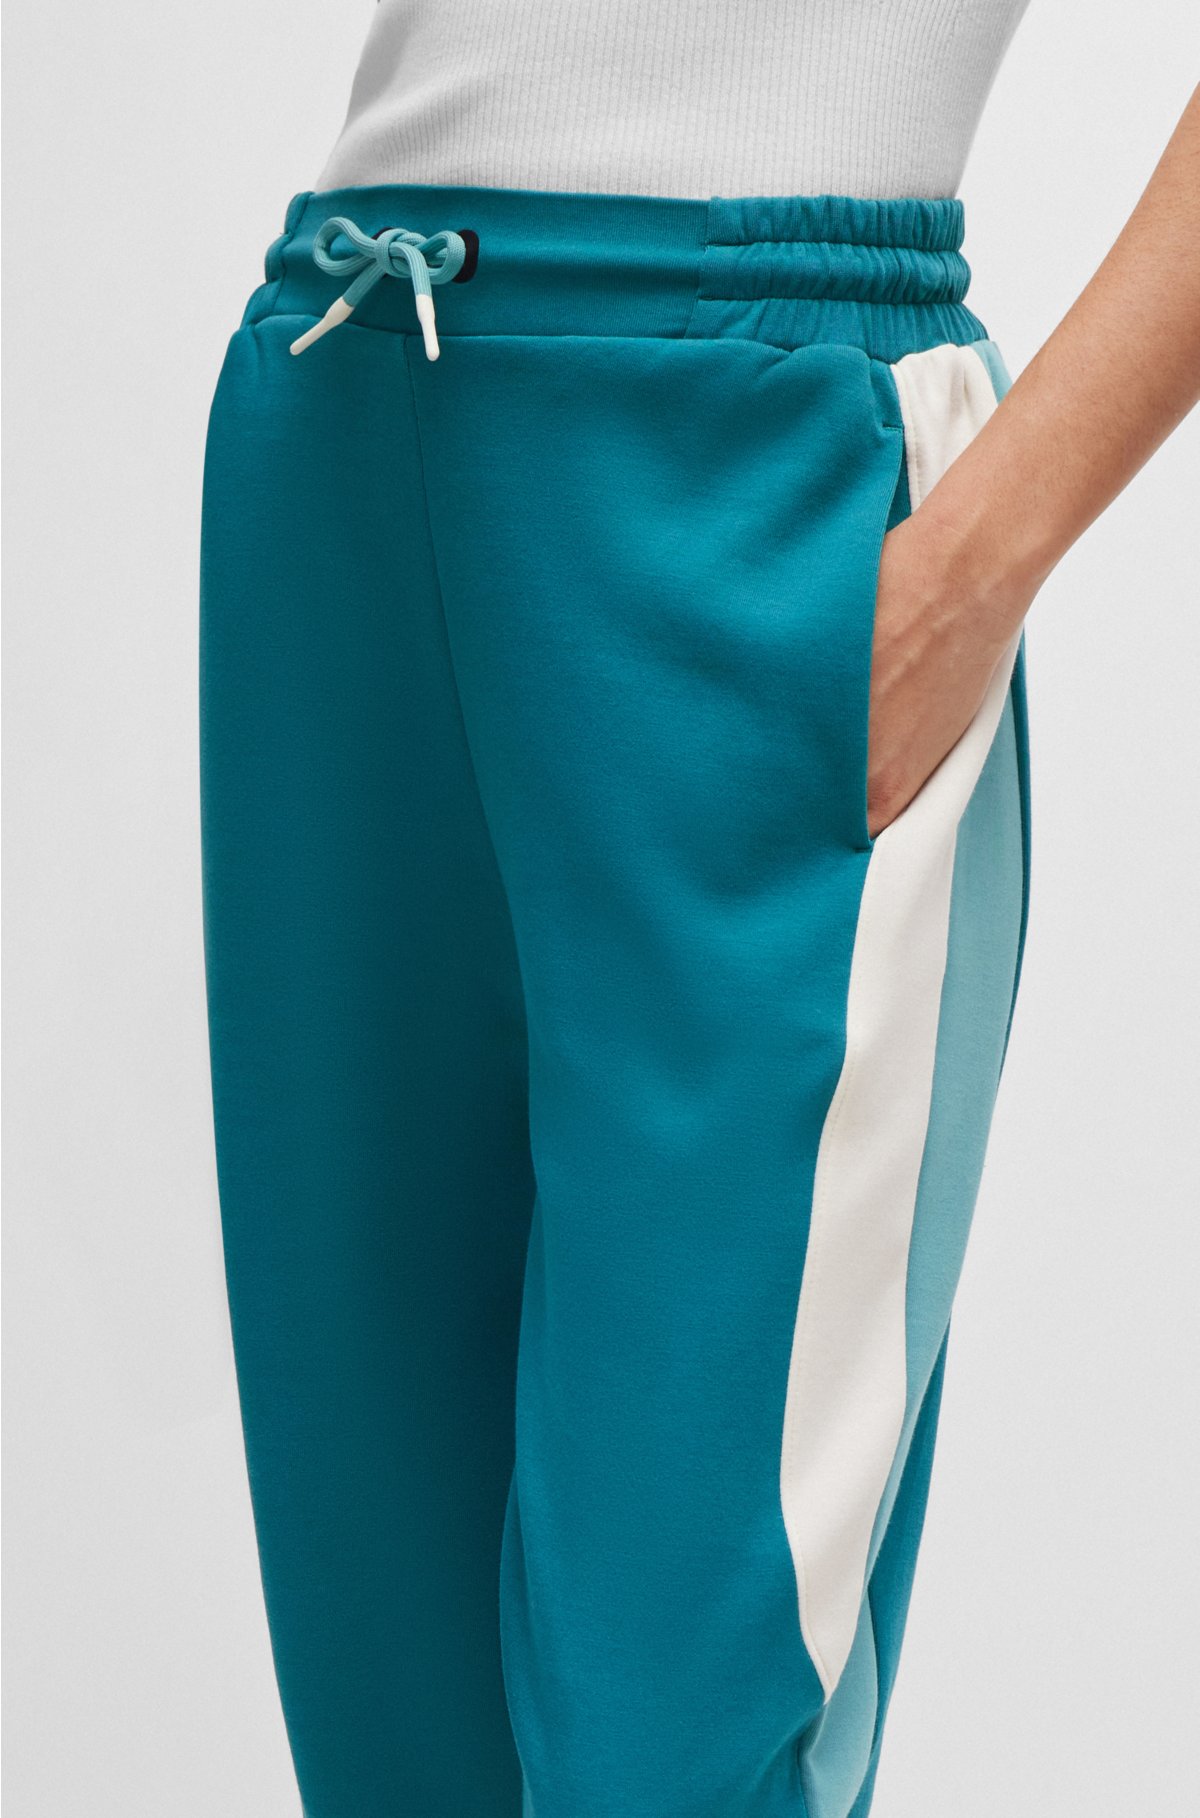 Baggy-fit tracksuit bottoms in stretch fabric, Petrol